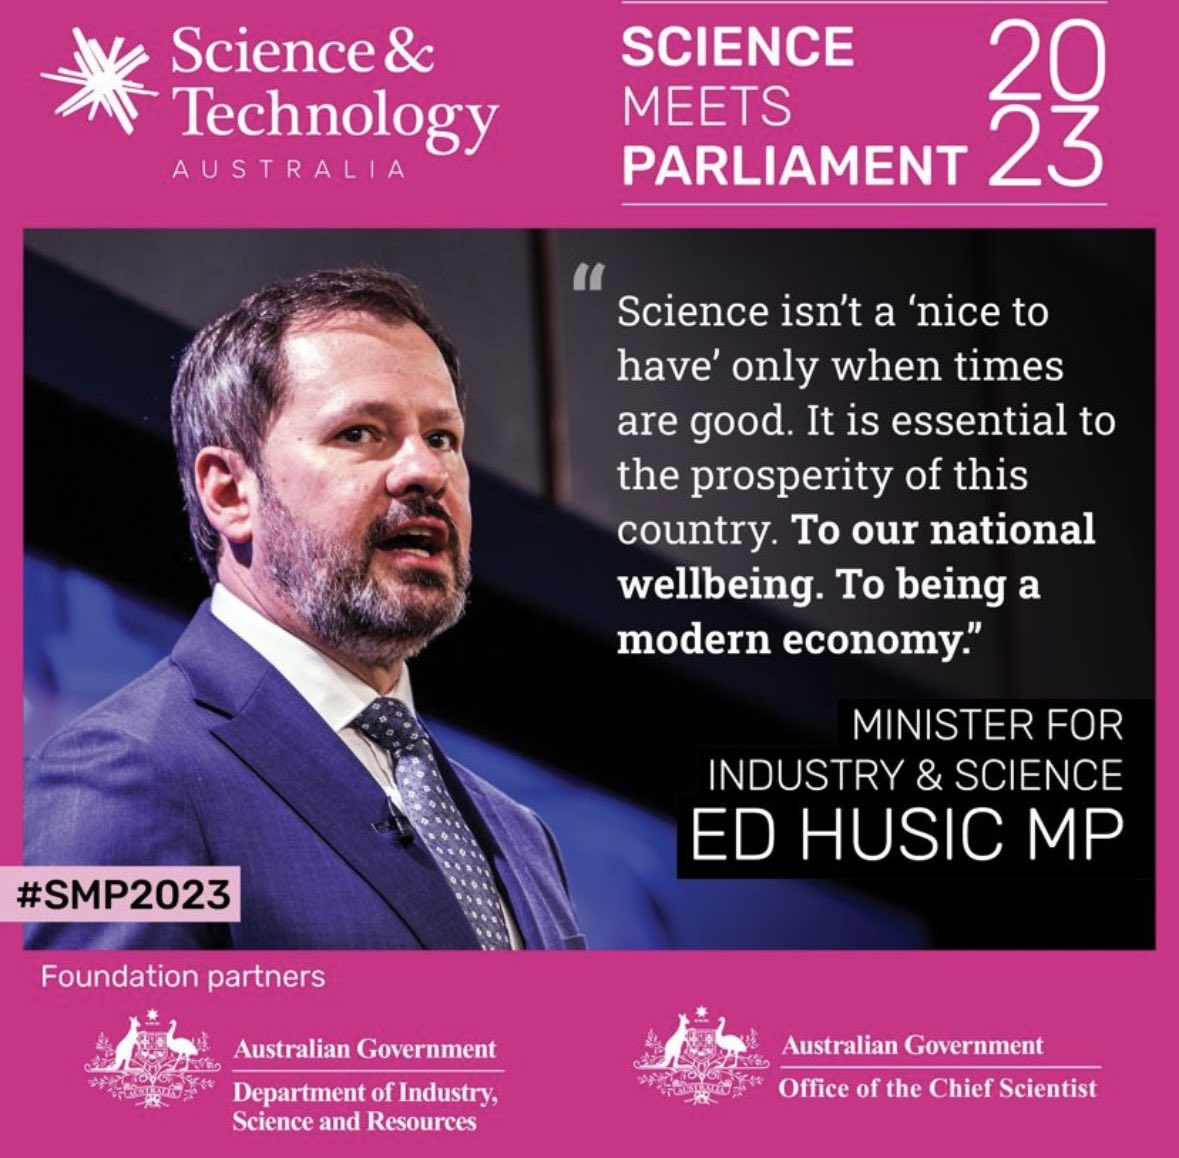 #ScienceMeetsParliament #smp2023 ⁦@ScienceAU⁩ Message heard loud and clear. Now for action….will we see increased government support for science in Australia to match that encouraging rhetoric?